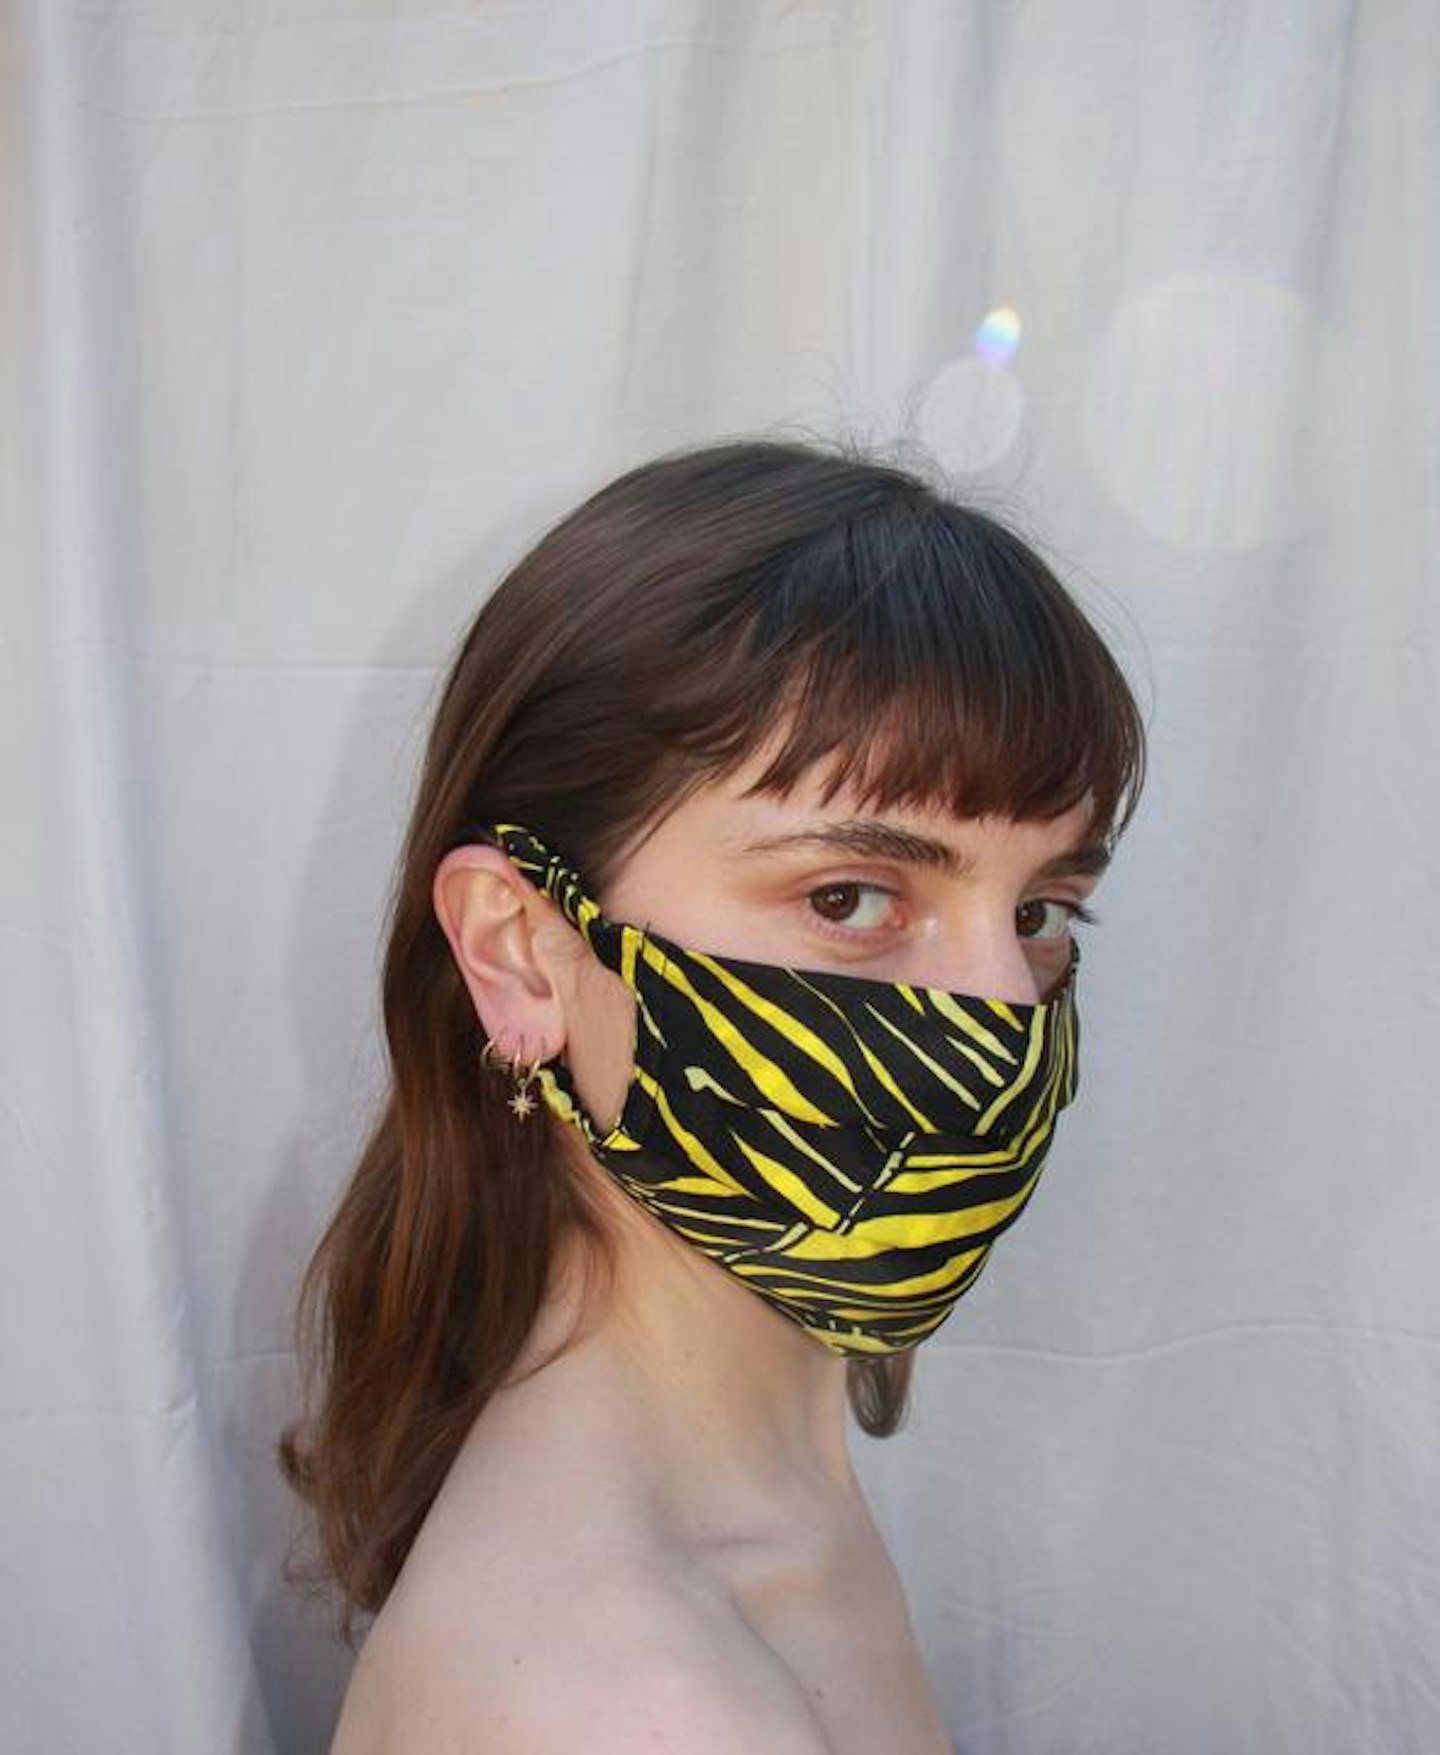 Helmstedt, Safety Mask - Beestract, £30